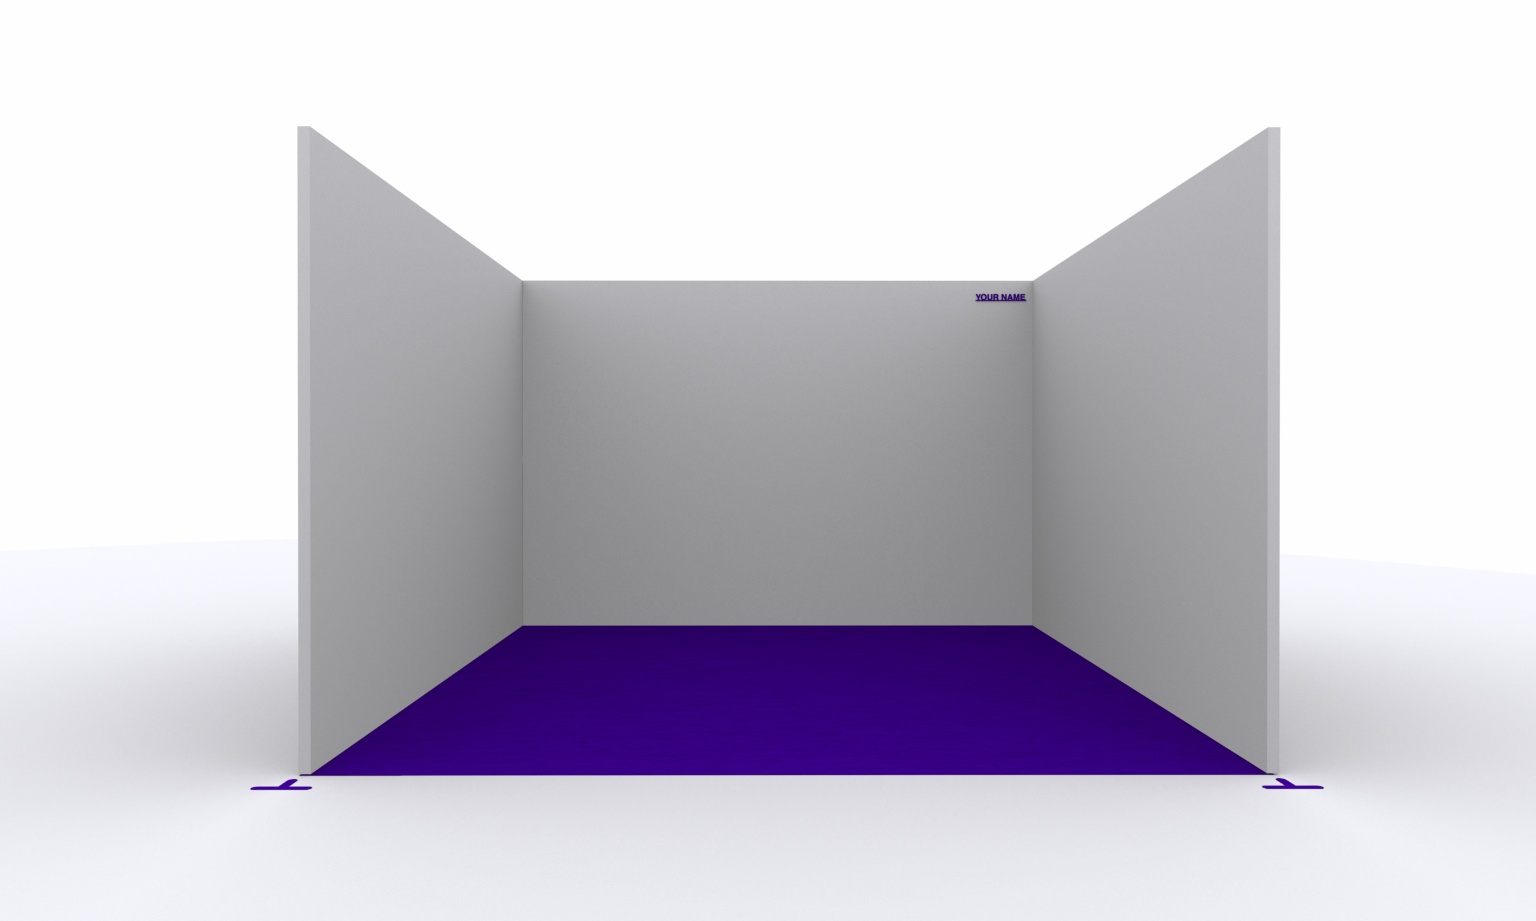 Exhibition booths